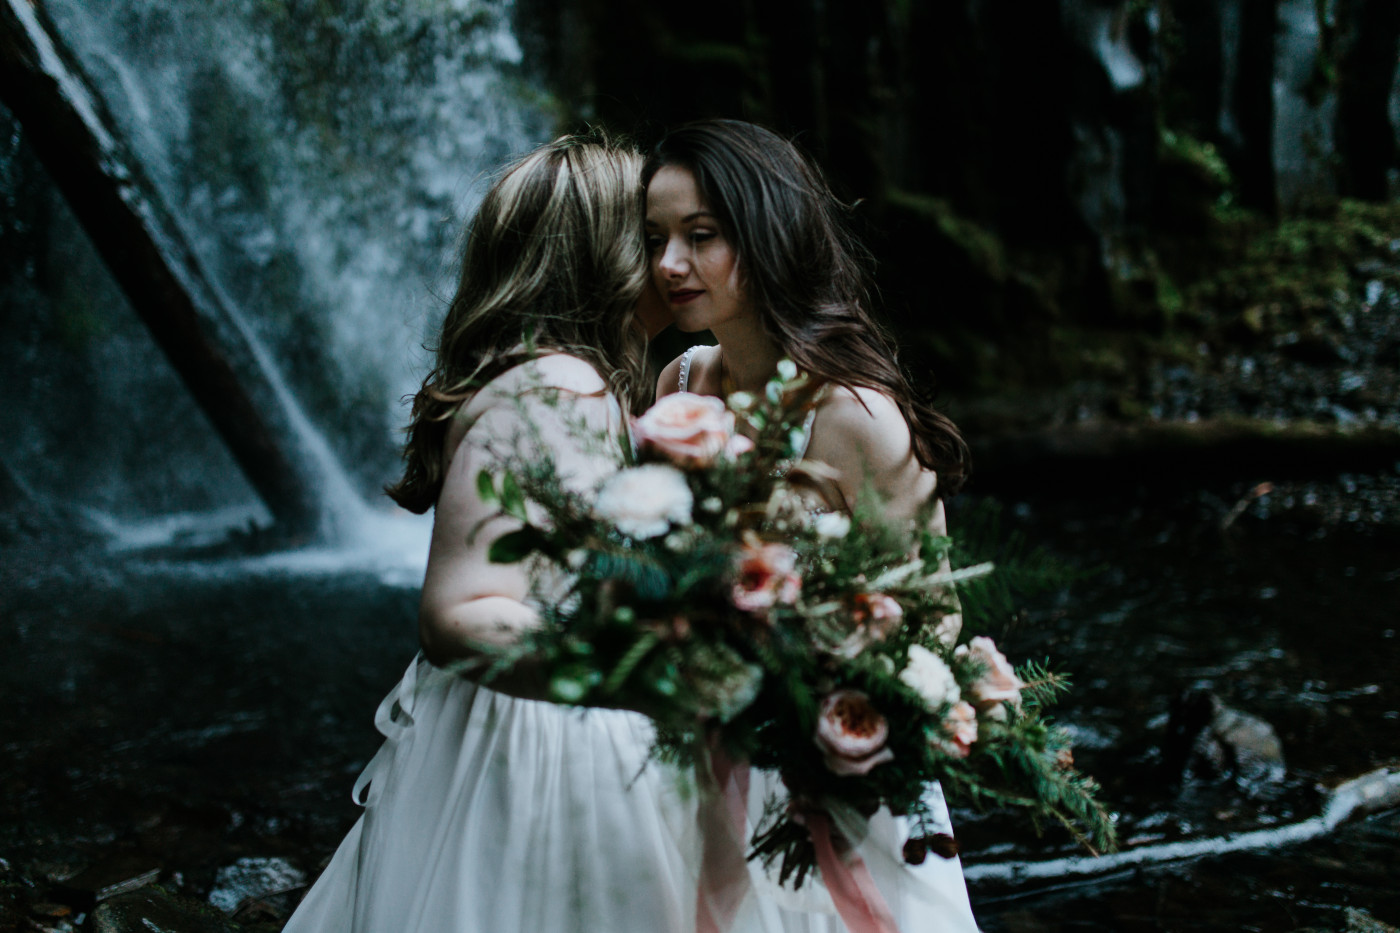 Elopement couple near a waterfall in the Columbia River Gorge. Elopement photography at the Columbia River Gorge by Sienna Plus Josh.